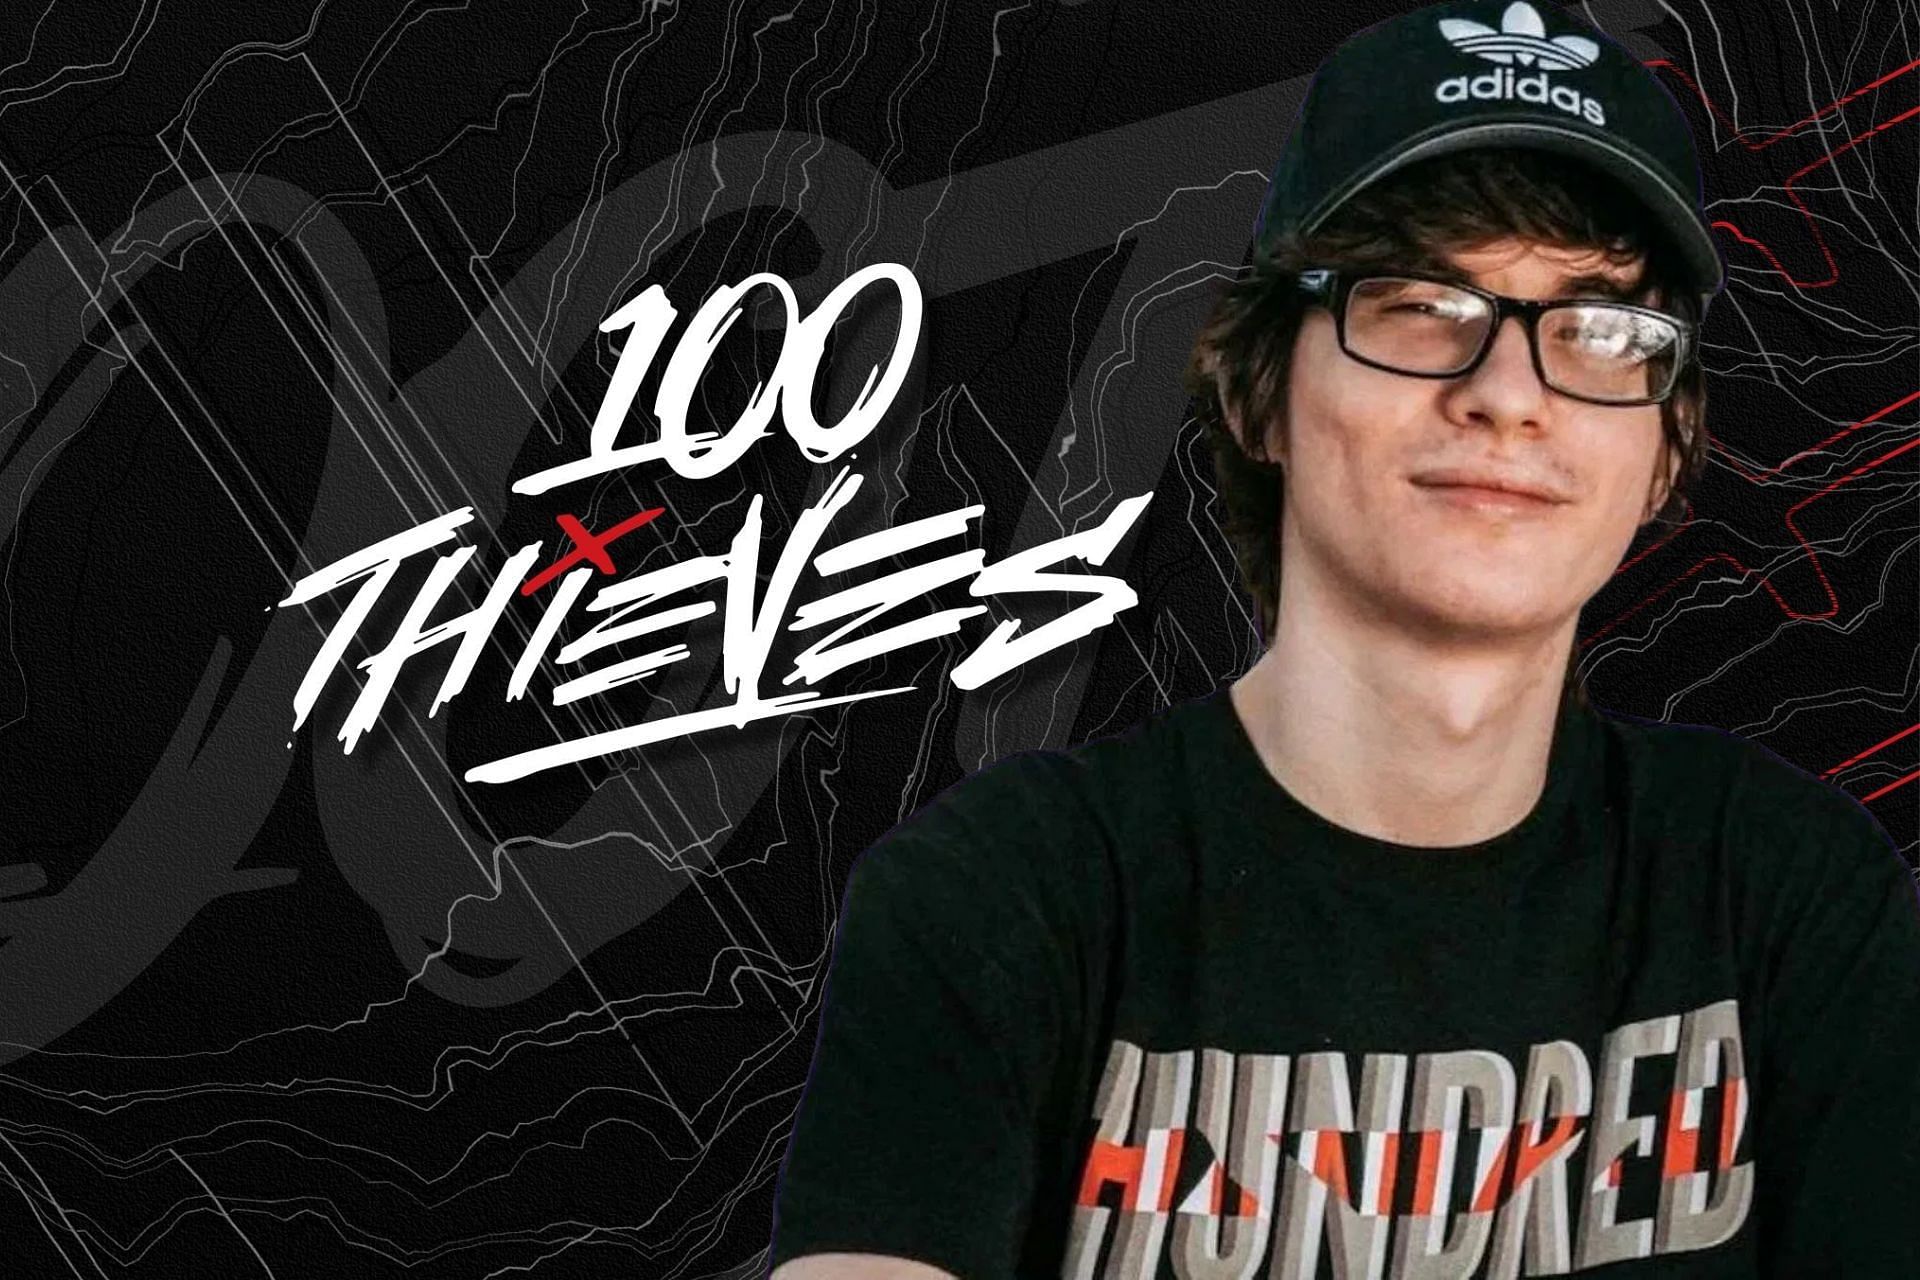 The mob 100 thieves